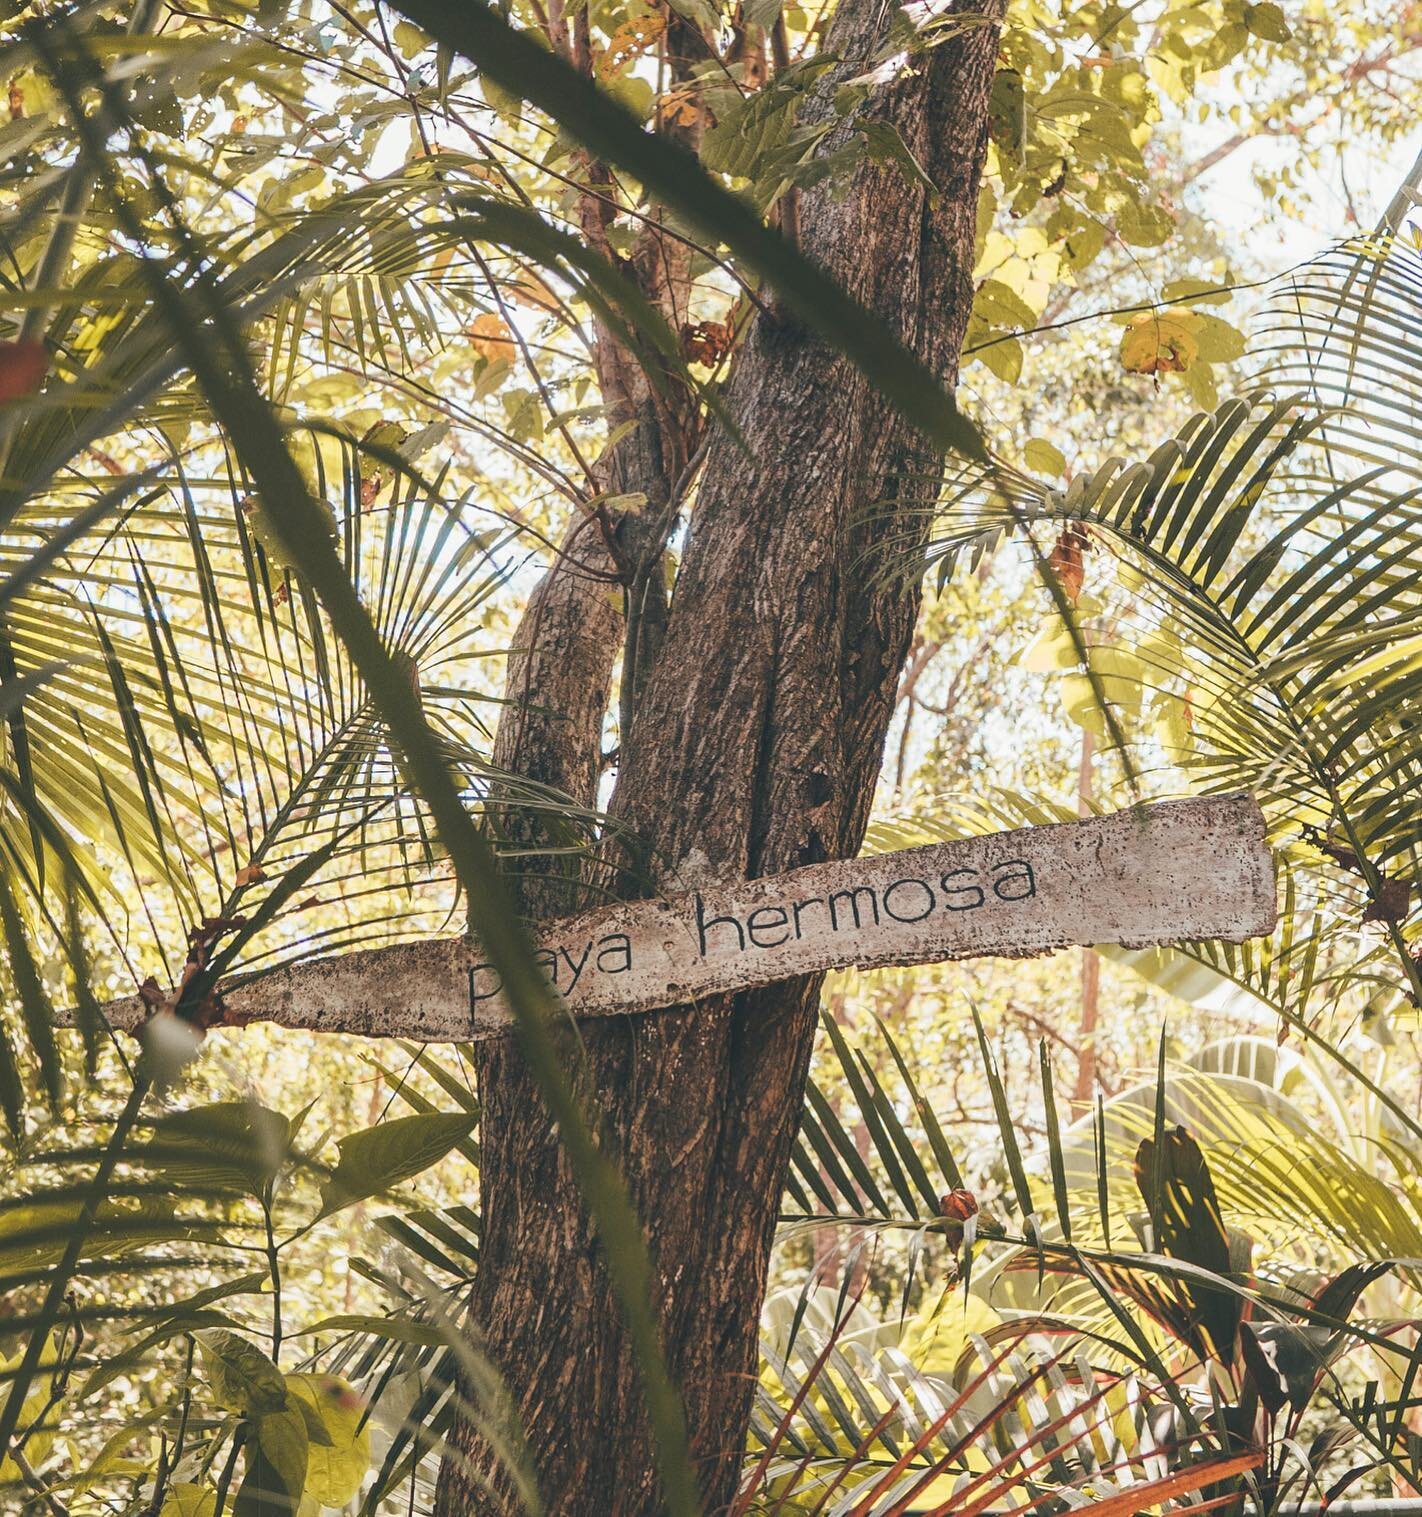 Surfing paradise awaits, just through the palm fronds and down the jungle path // Playa Hermosa